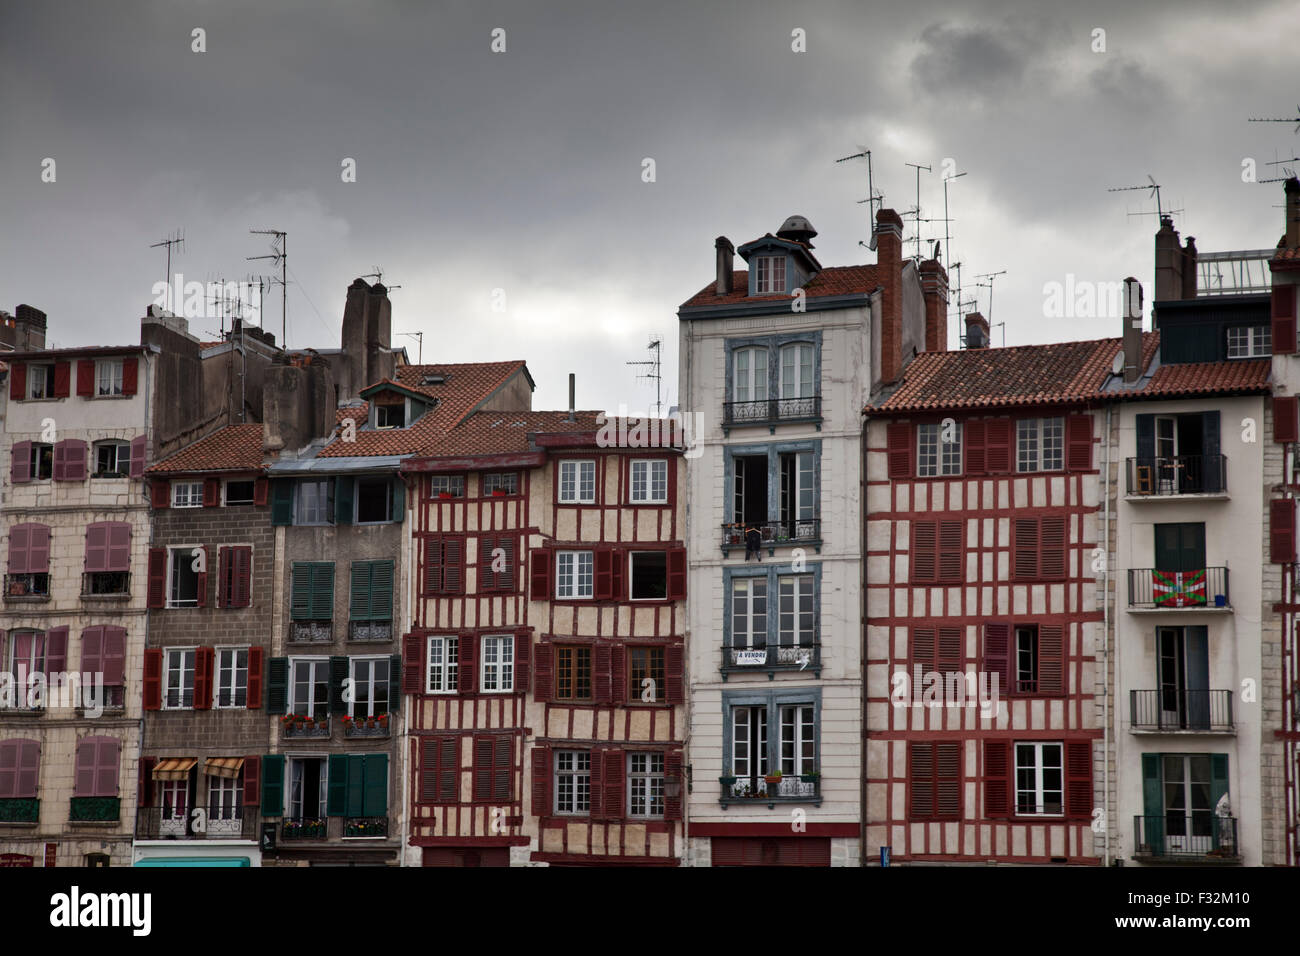 Premium Photo  Facade with doors and windows typical of the south of  france in the basque country bayonne